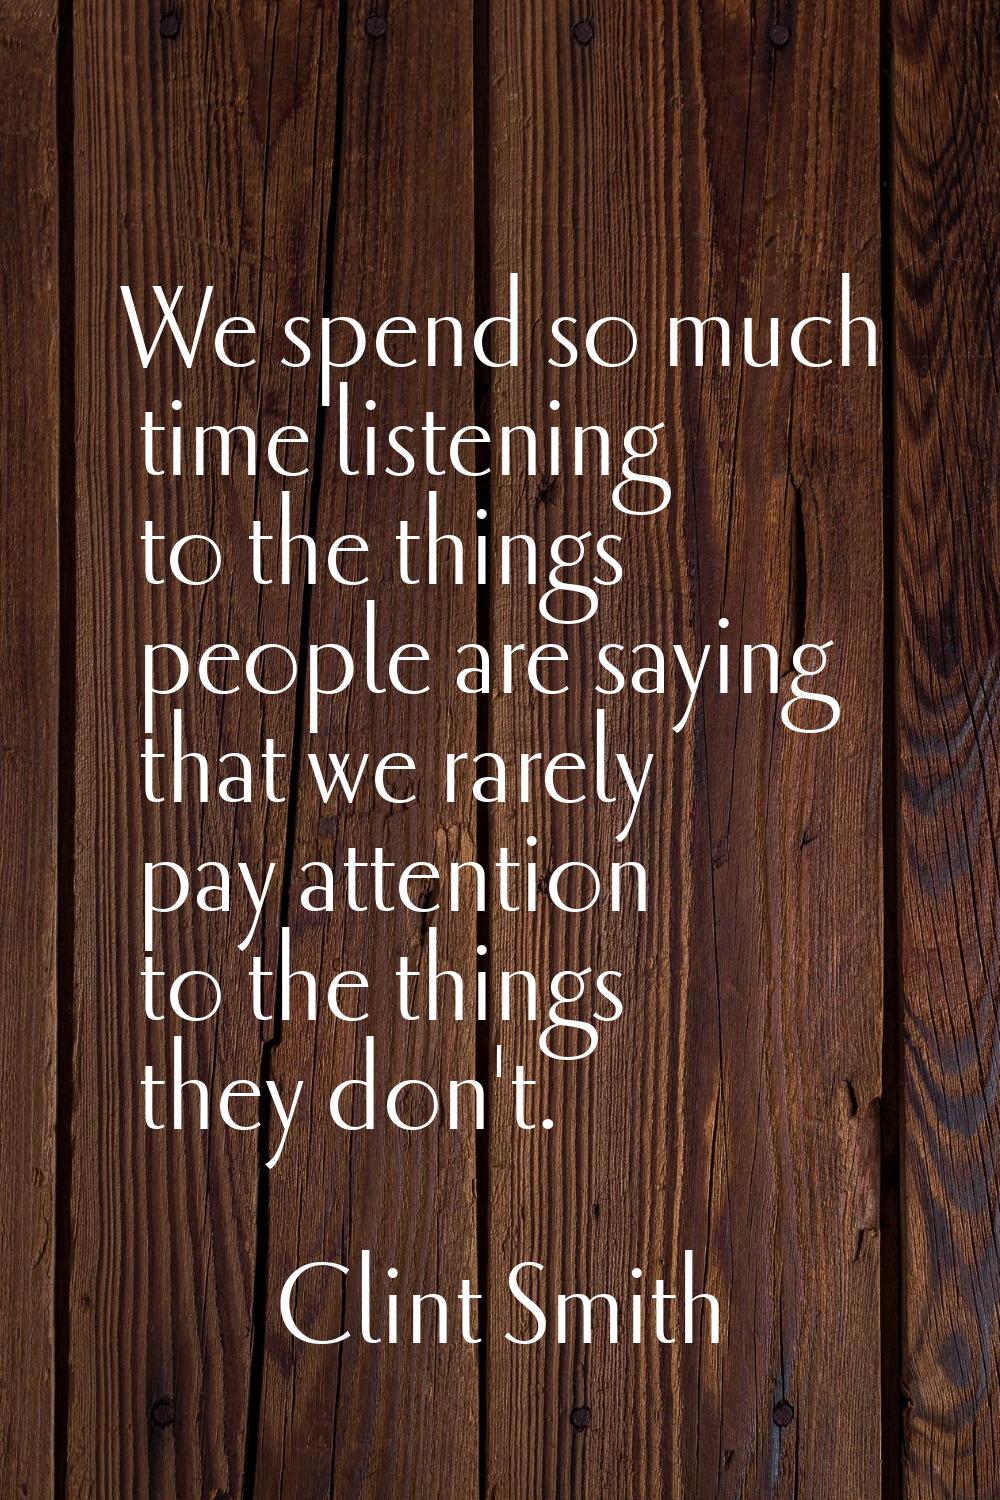 We spend so much time listening to the things people are saying that we rarely pay attention to the